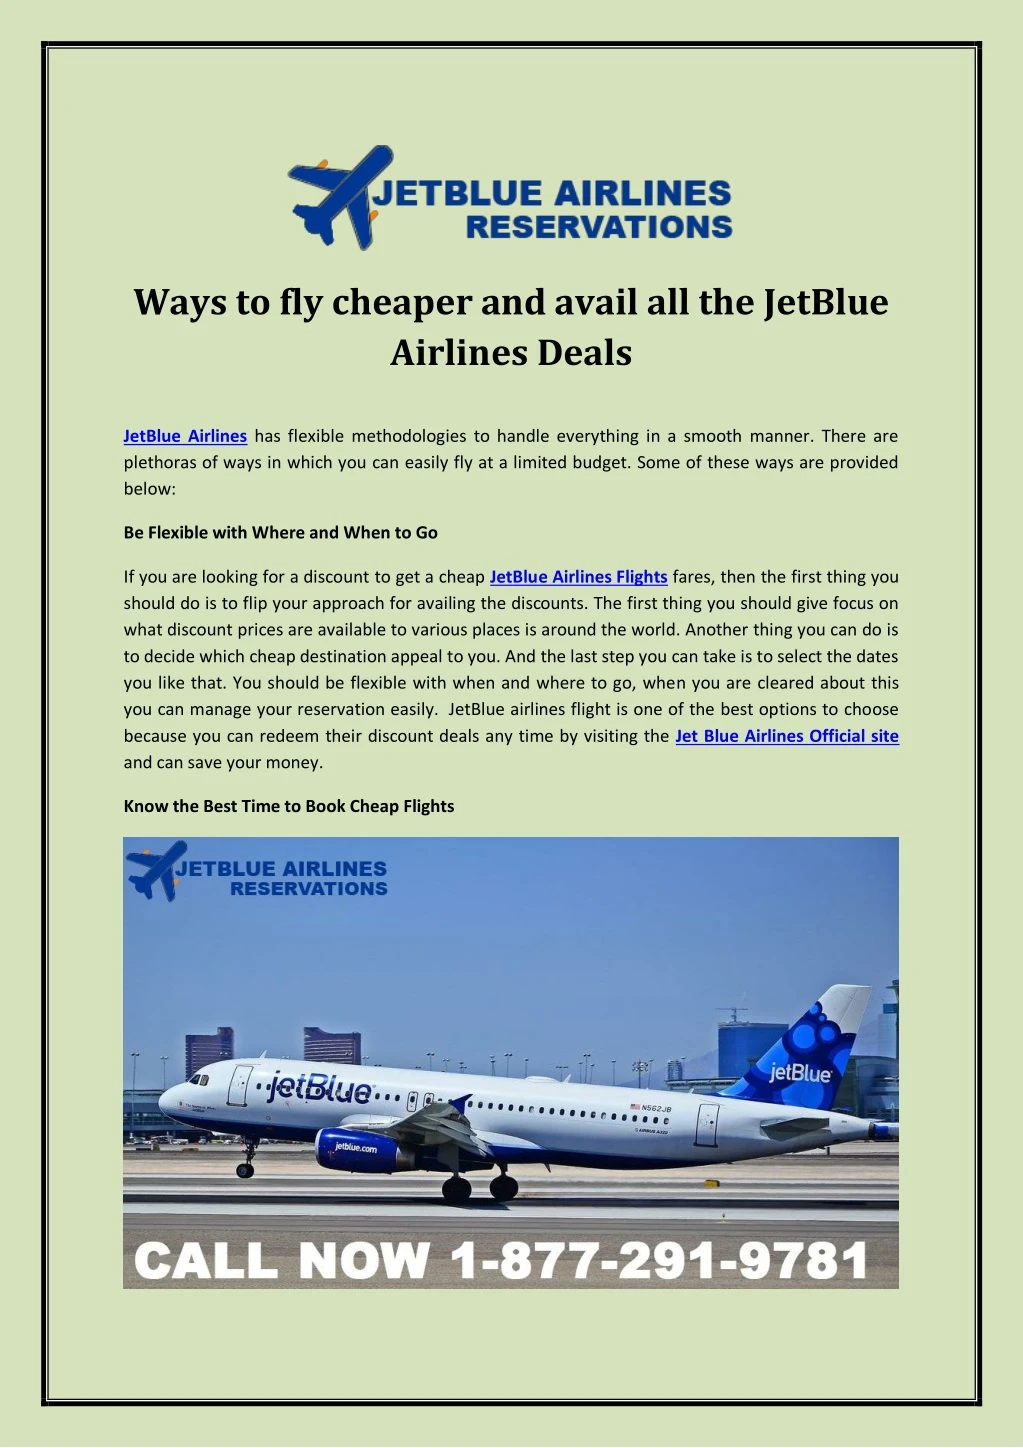 ways to fly cheaper and avail all the jetblue